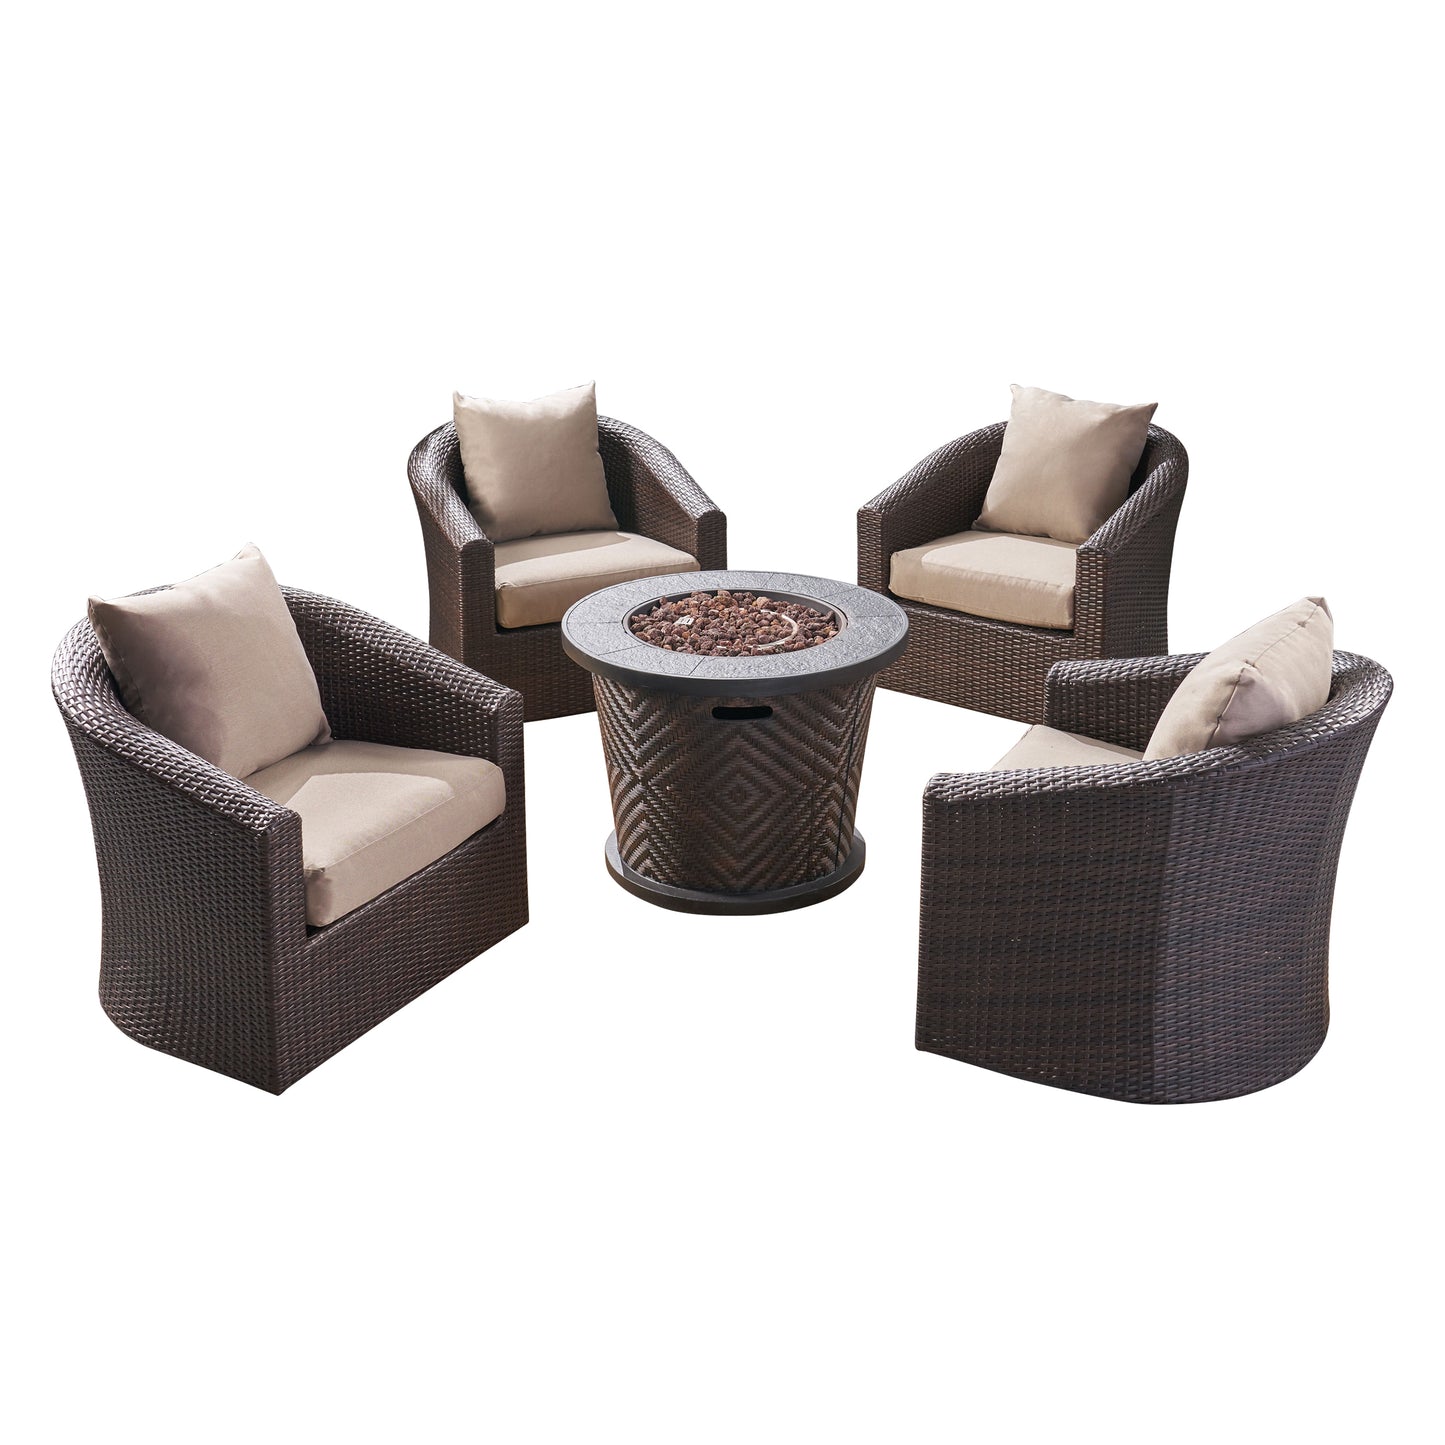 Liyam Outdoor 4 Piece Wicker Swivel Chair Set with Fire Pit, Multi Brown and Brown